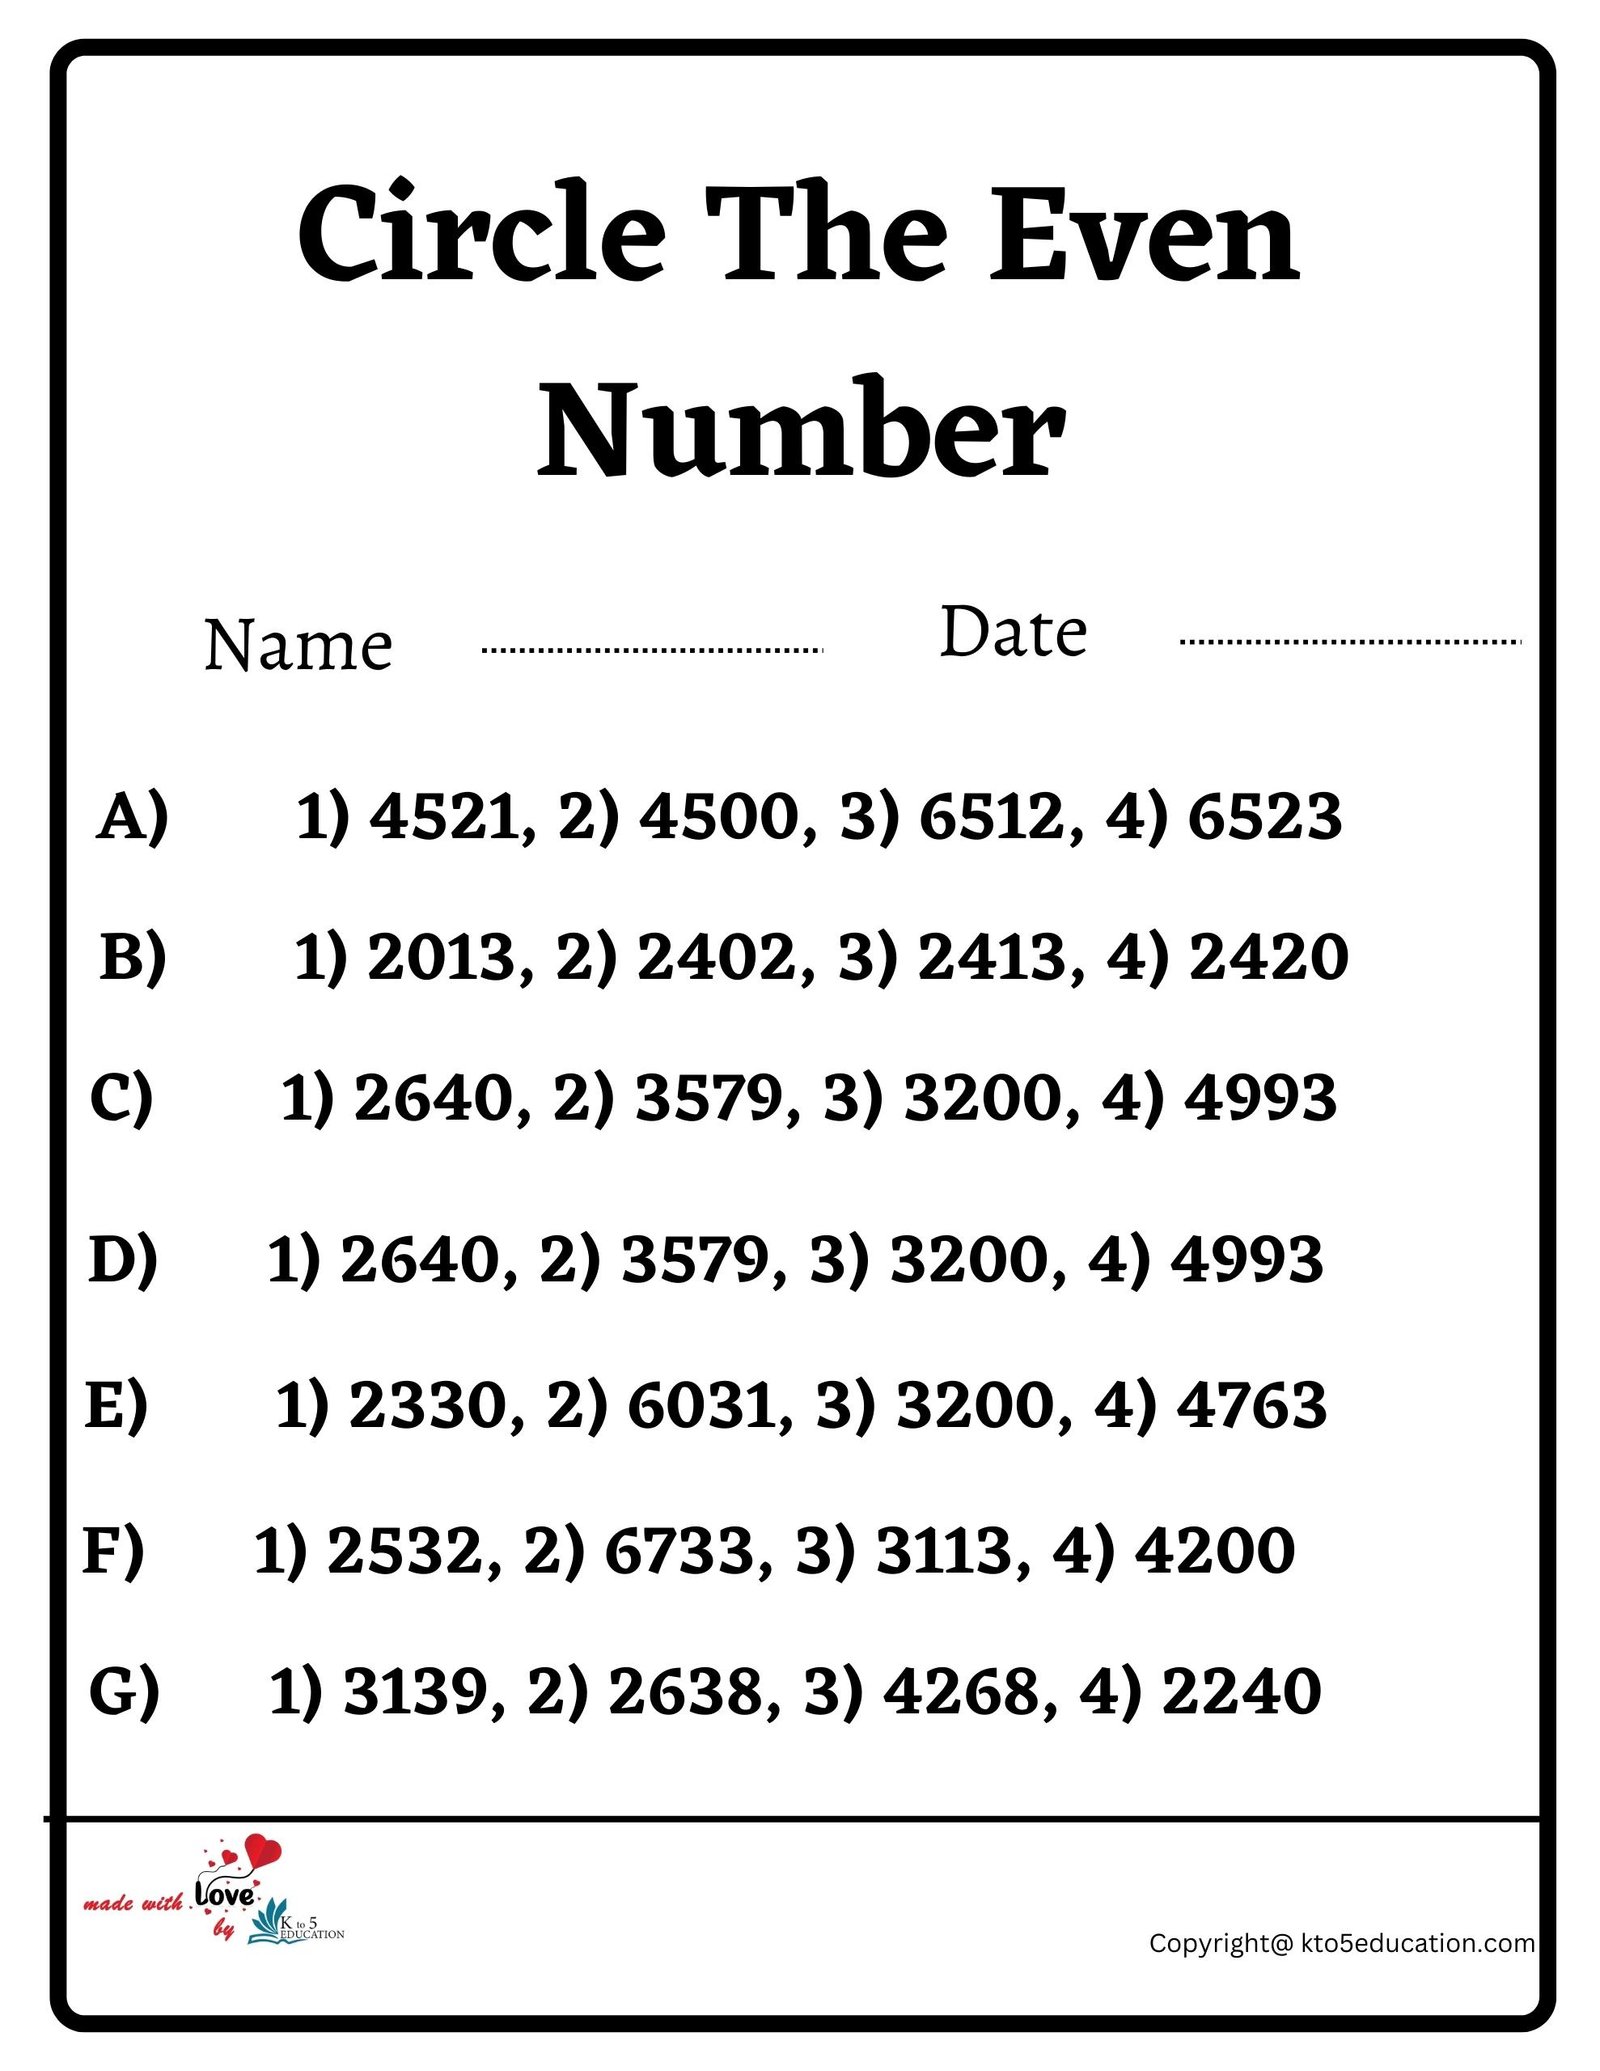 Circle The Even Number Worksheet 2